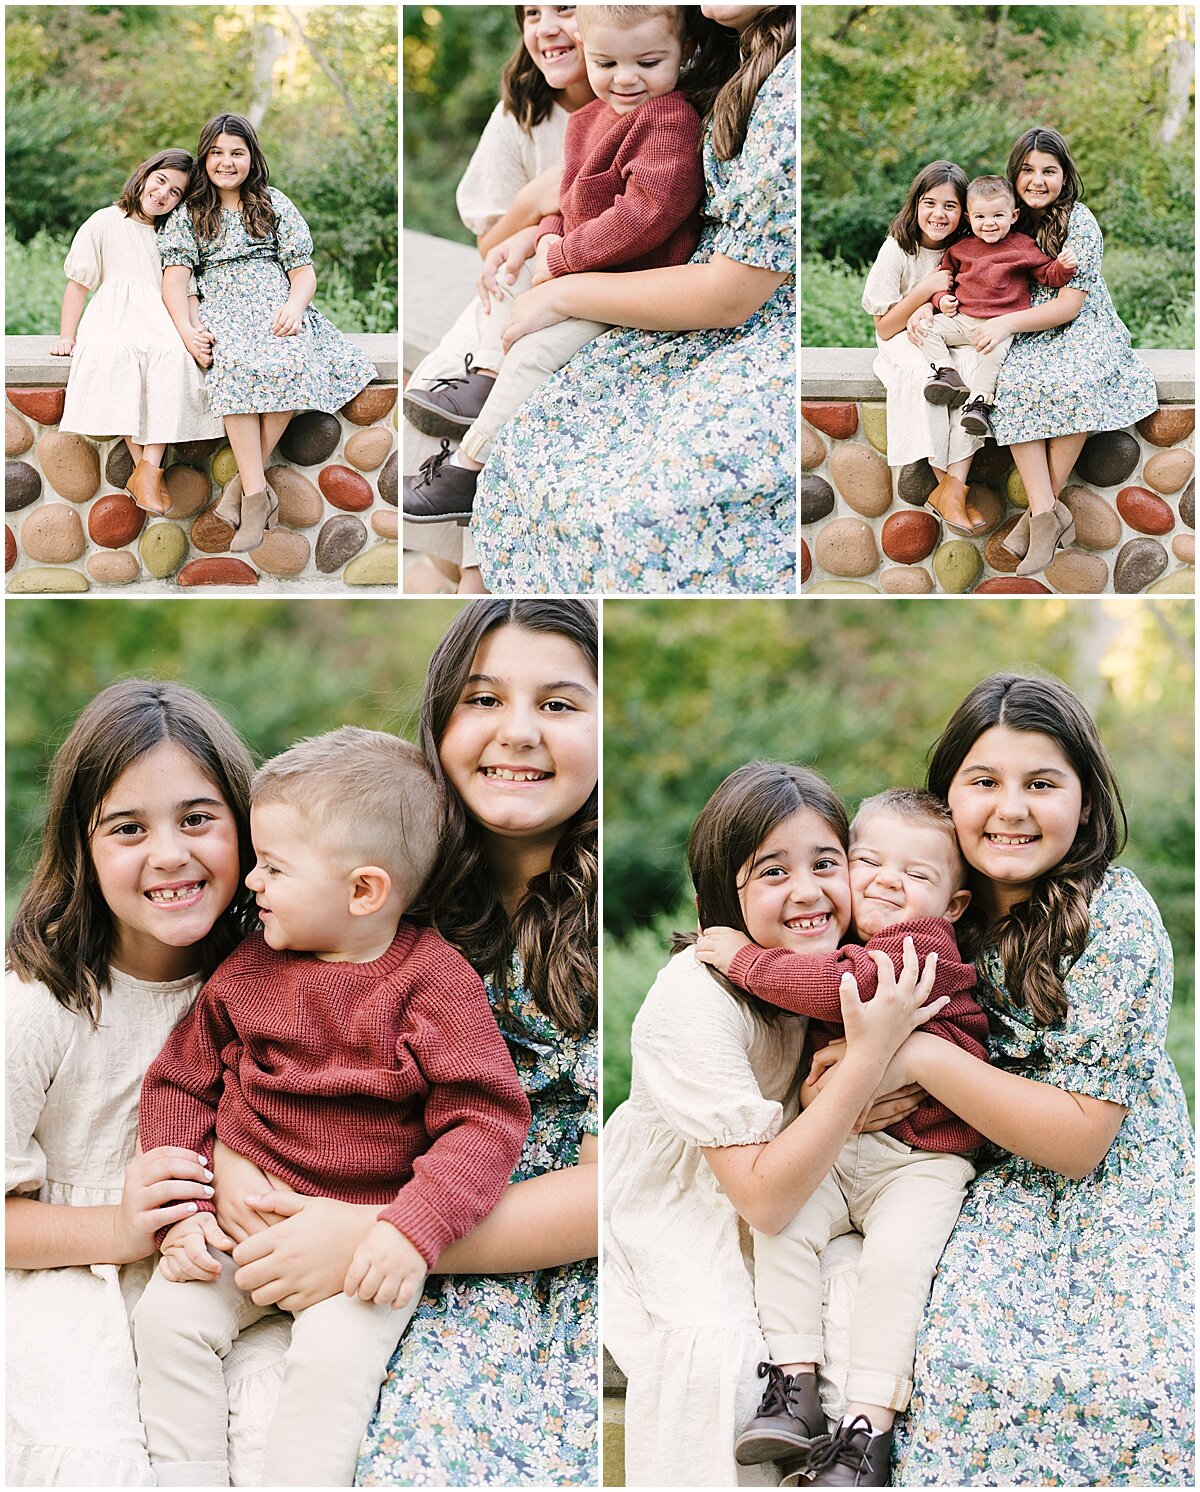  Photo collage of family photography- two girls and baby boy.  